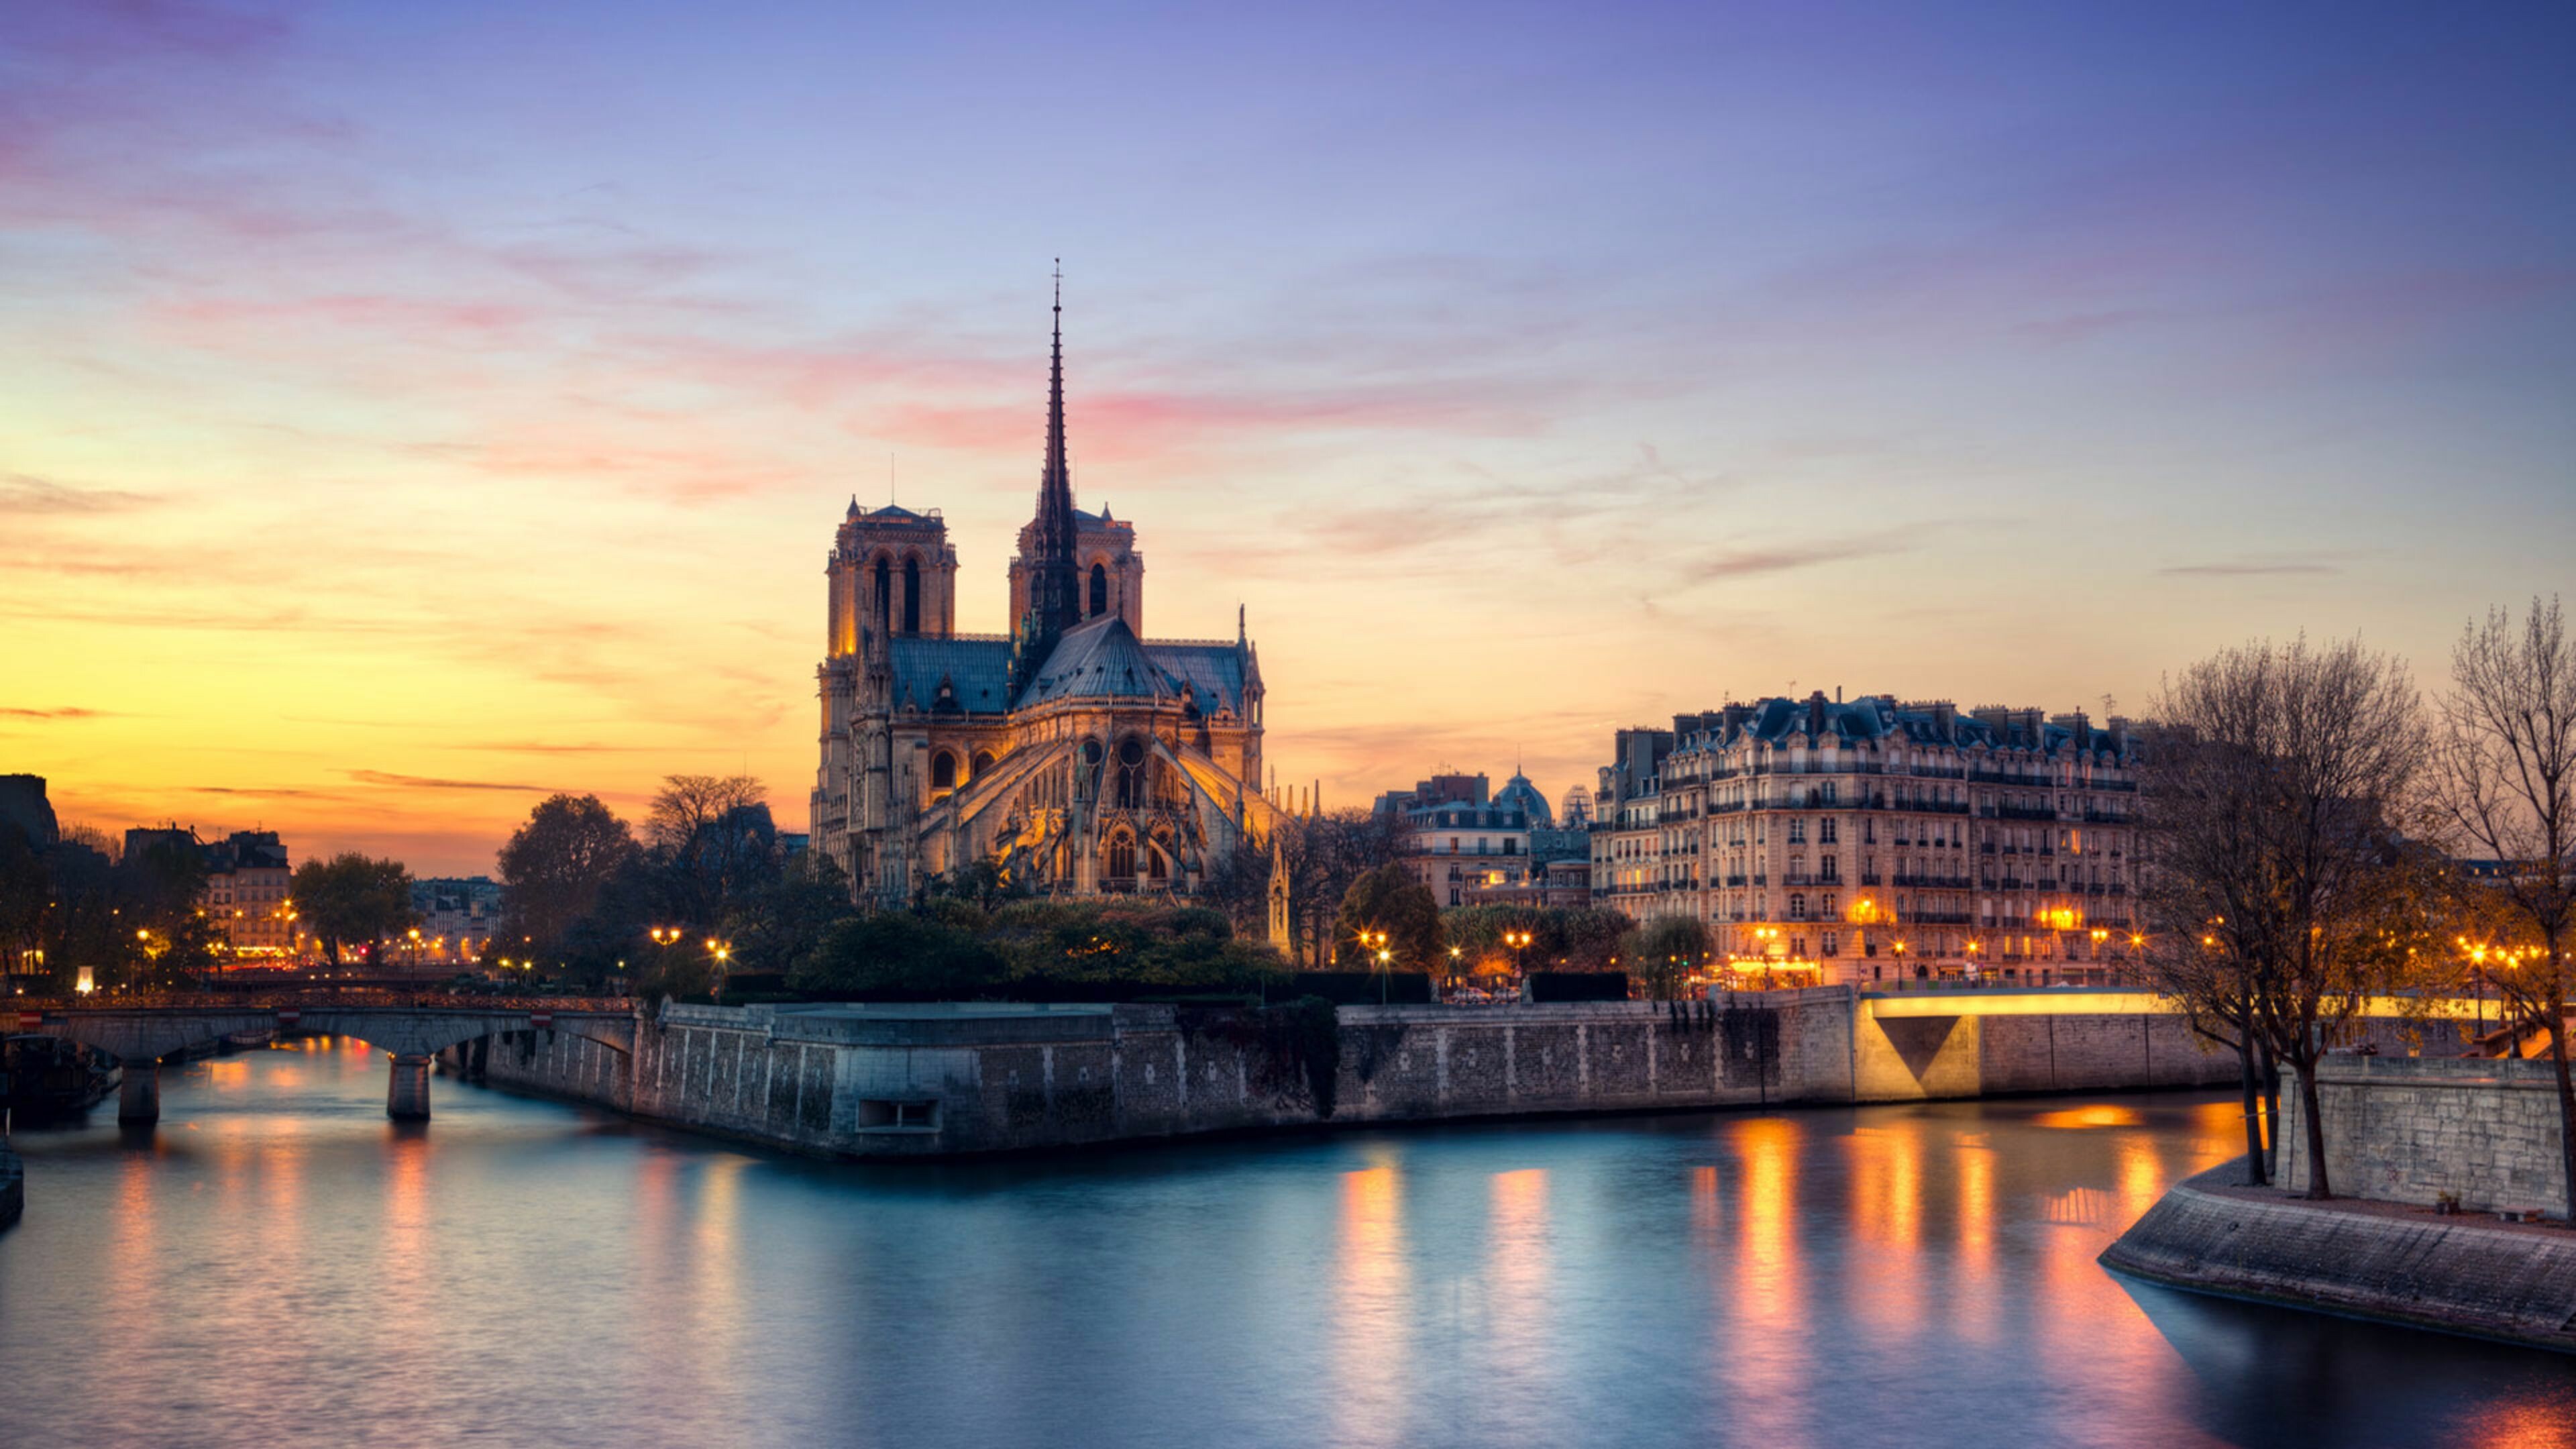 France: Paris, the country's main cultural and commercial center. 3840x2160 4K Wallpaper.